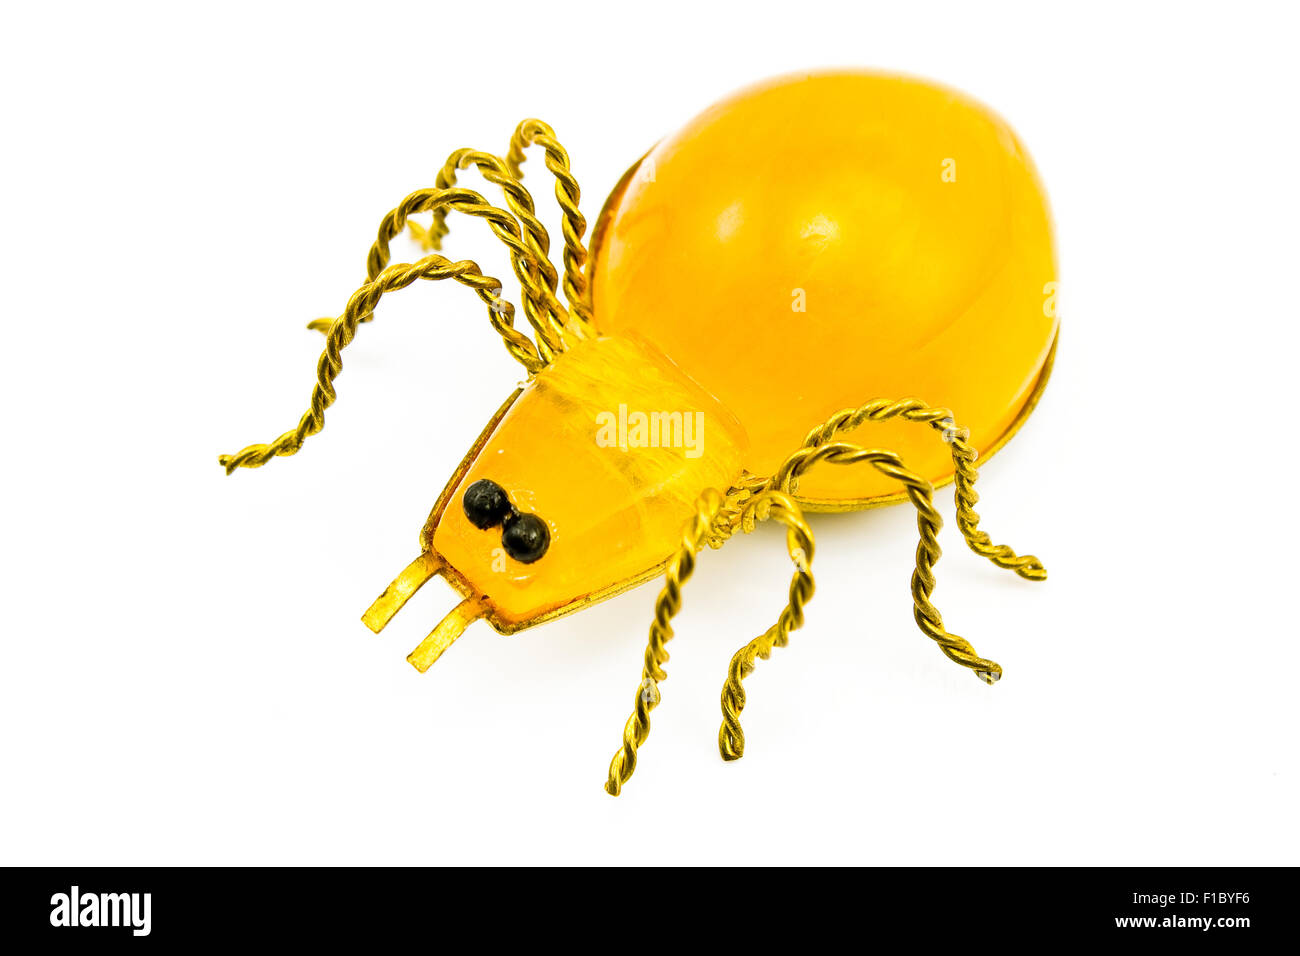 Spider ambre isolated on white Banque D'Images